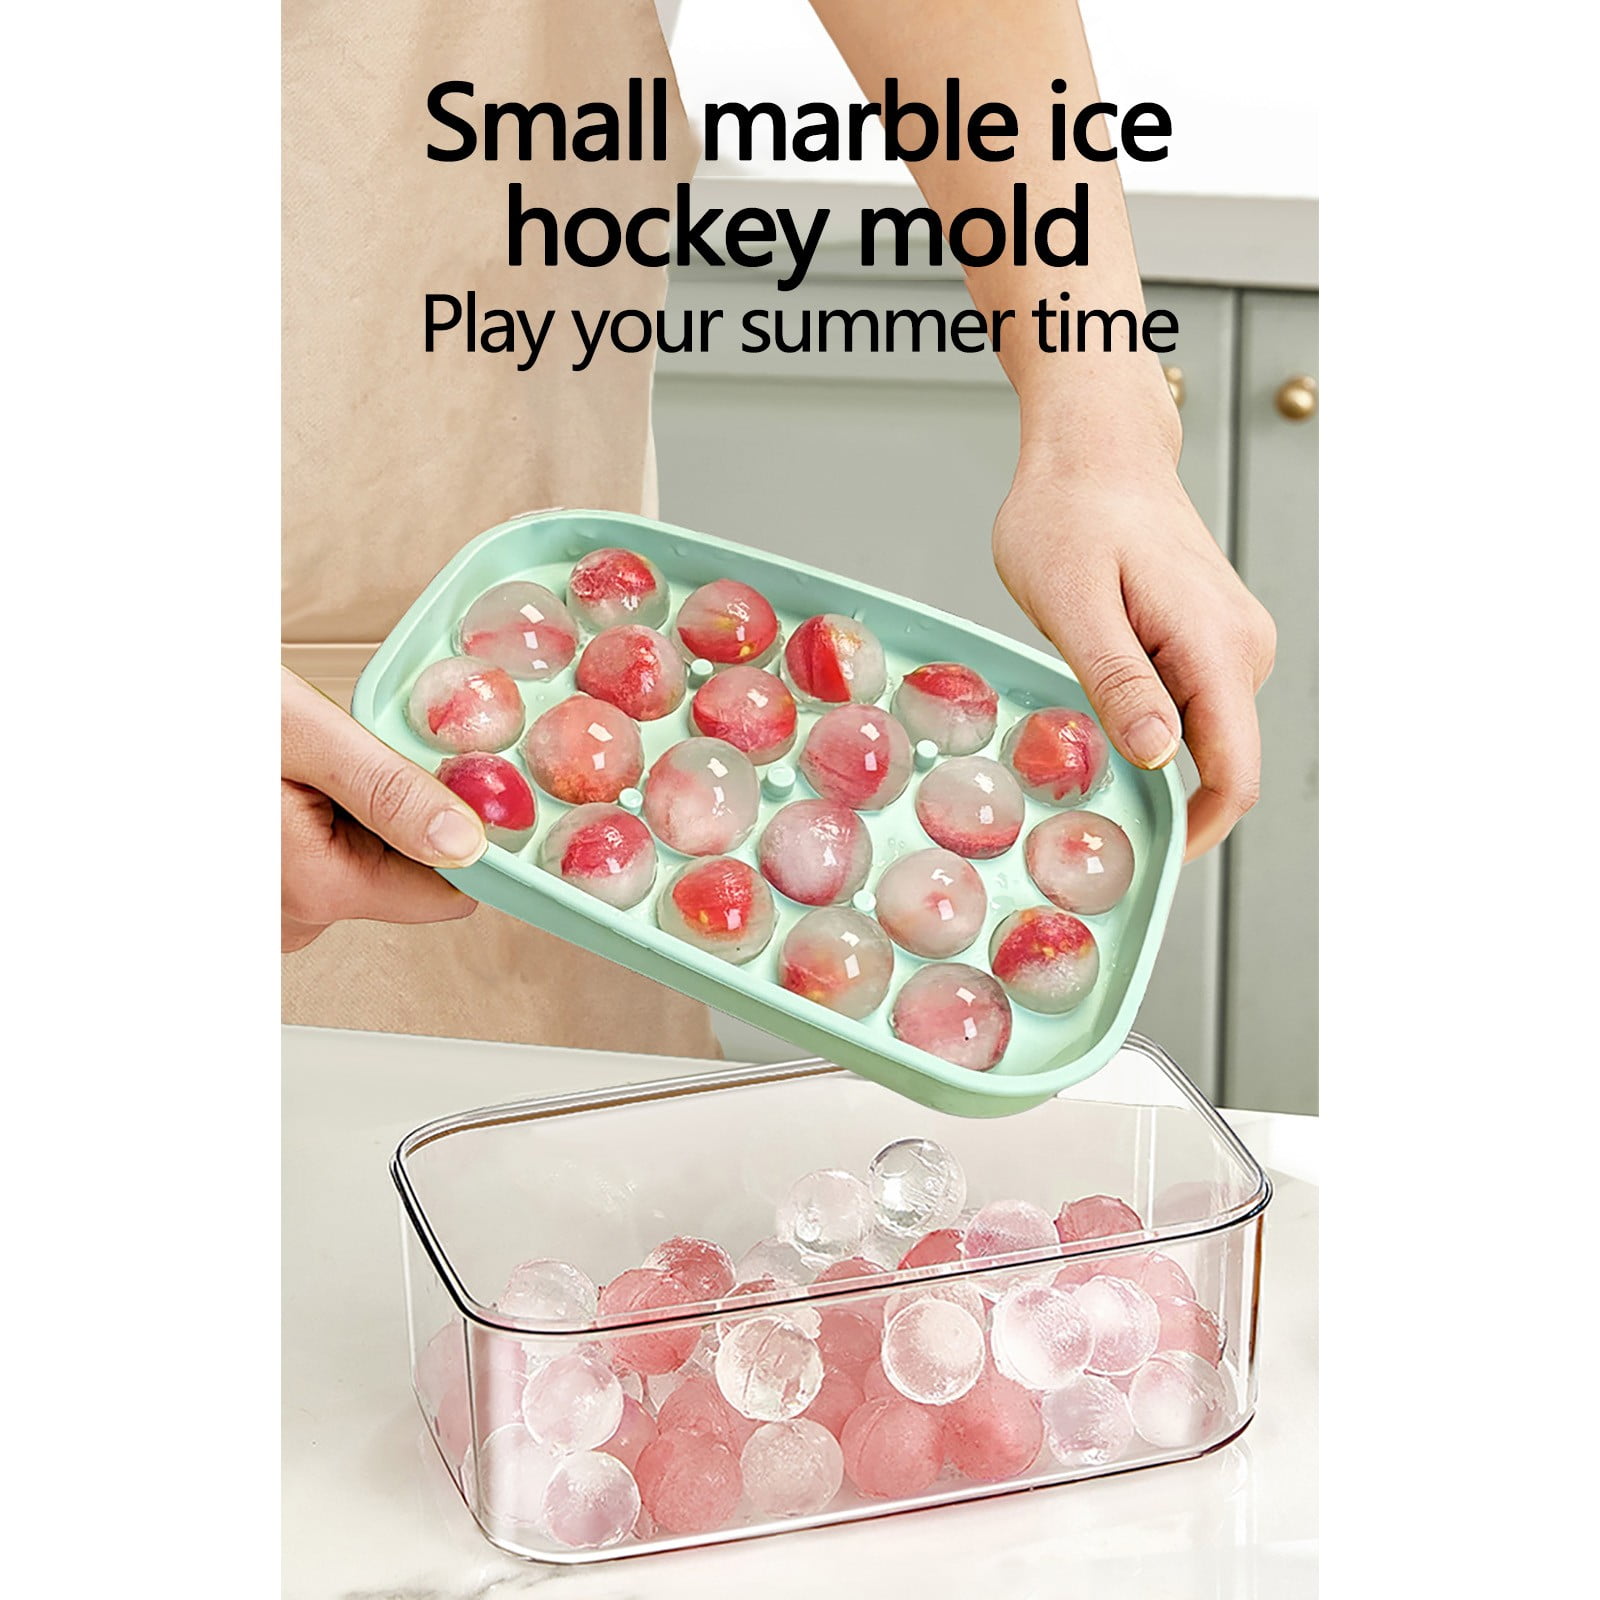  Lamesa Round Ice Cube Trays for Freezer with Cover & Bin, 3  Packs 1In Small Circle Ice Ball Maker Mold, BPA Free Ice Tray for Cocktail  & Whiskey (3 Sphere Trays